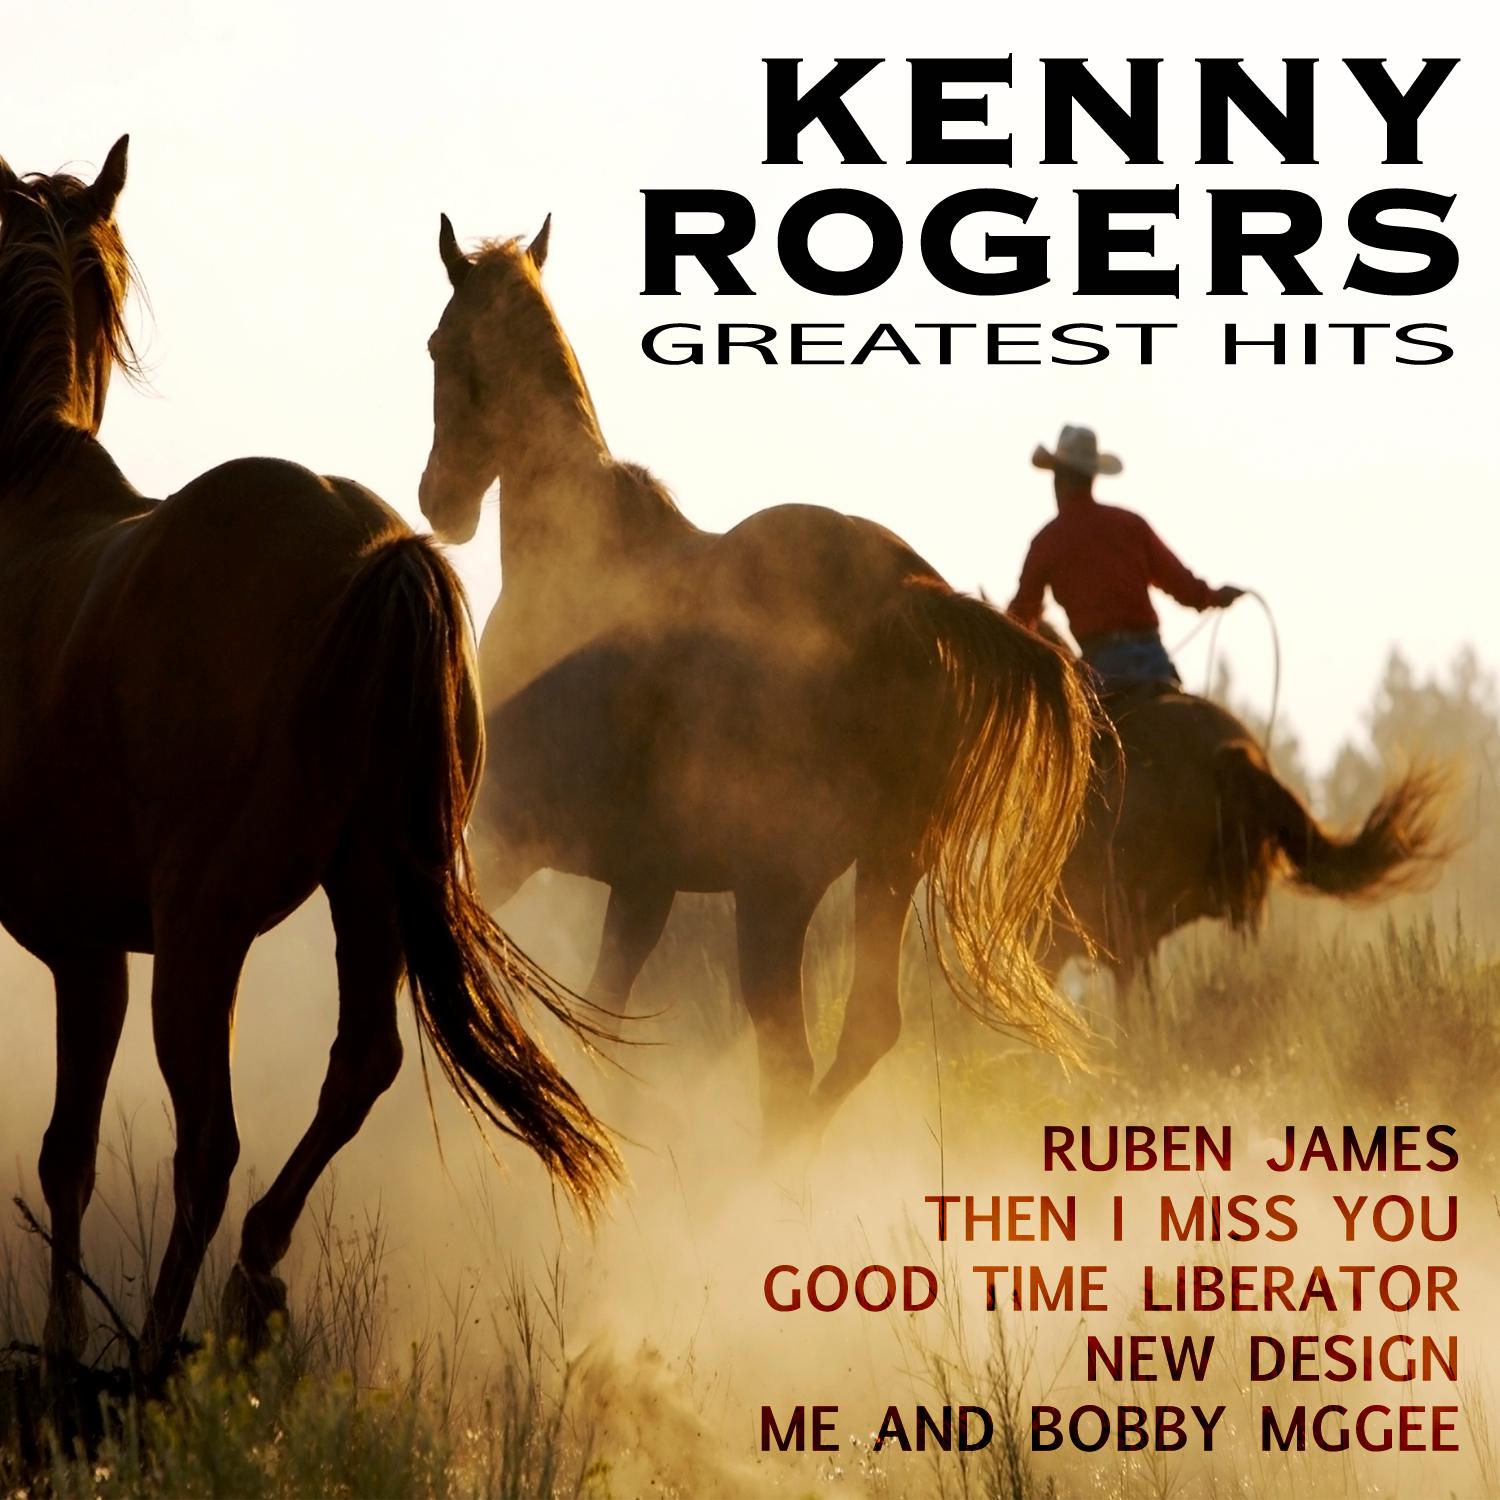 Listen to the album kenny rogers greatest hits